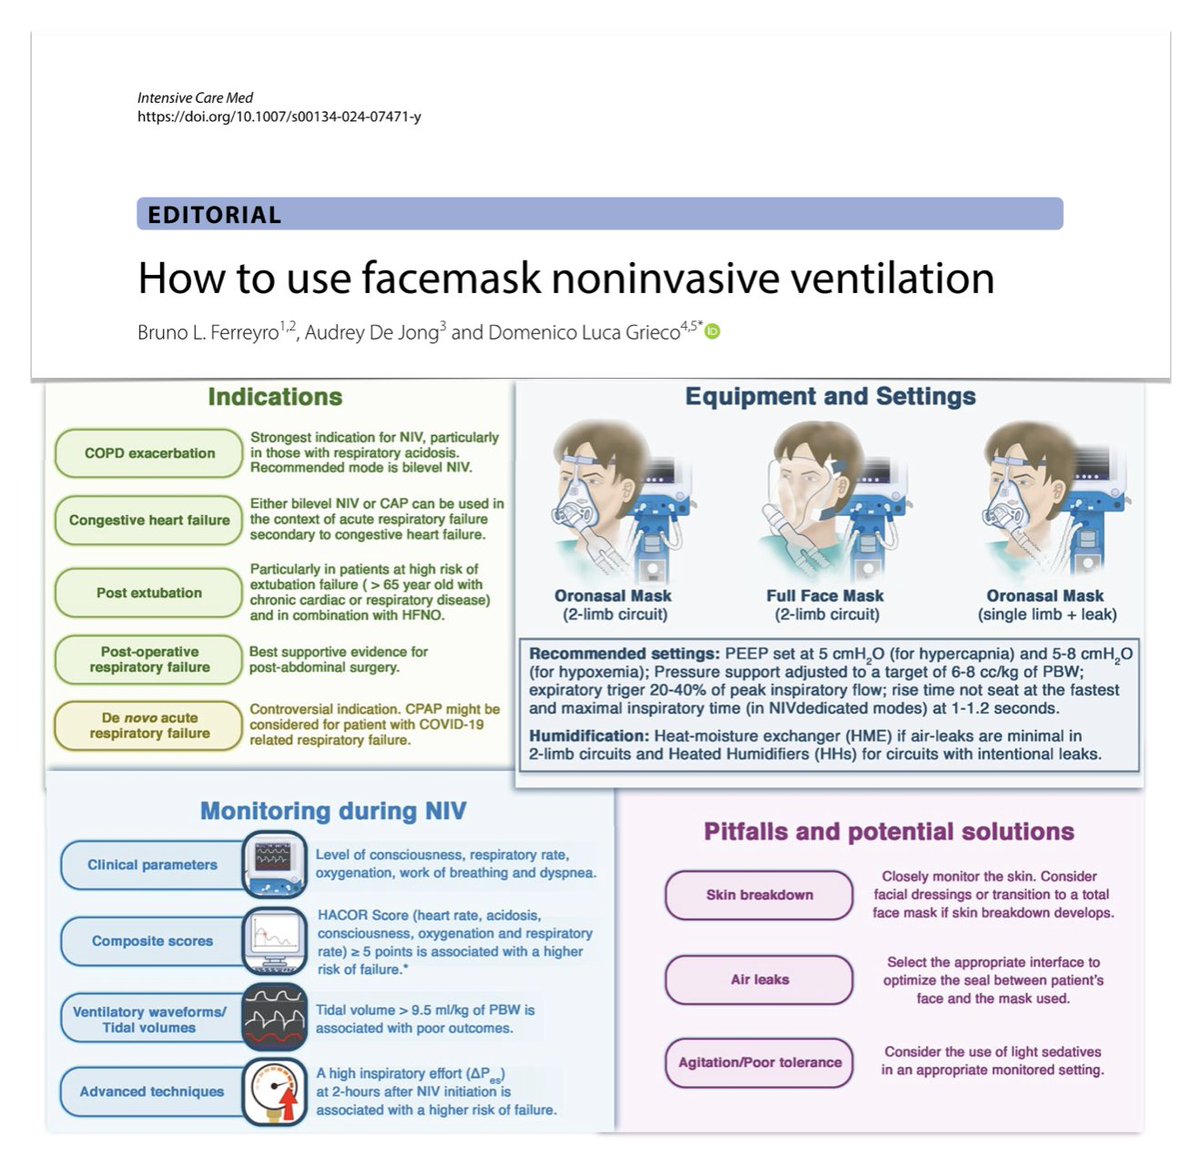 How to use face-mask noninvasive ventilation
🫁 set‑up & ventilatory settings
🚦 indications & contraindications 
🖥️ monitoring to assess response, adjust settings, identify need to switch to IMV
⚠️ associated constraints associated
#FOAMcc on @yourICM
🔓 rdcu.be/dJex8